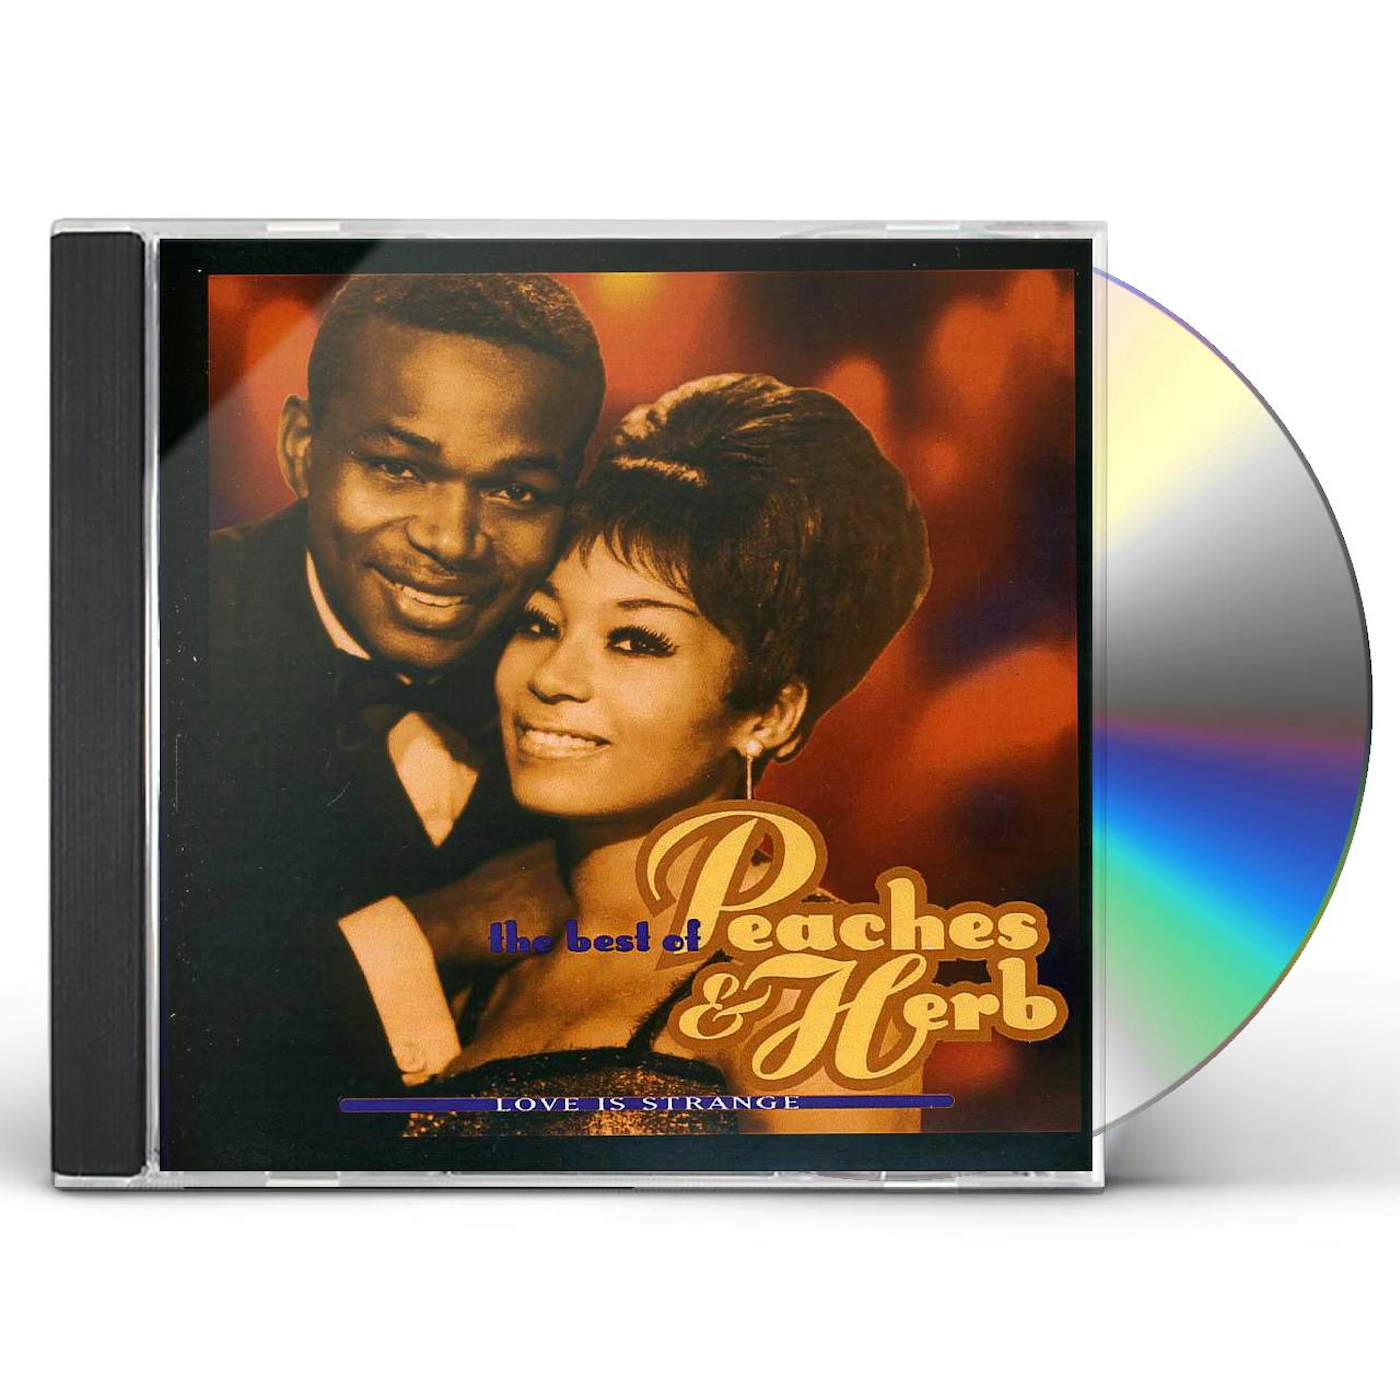 Peaches & Herb 20TH CENTURY MASTERS: MILLENNIUM COLLECTION CD